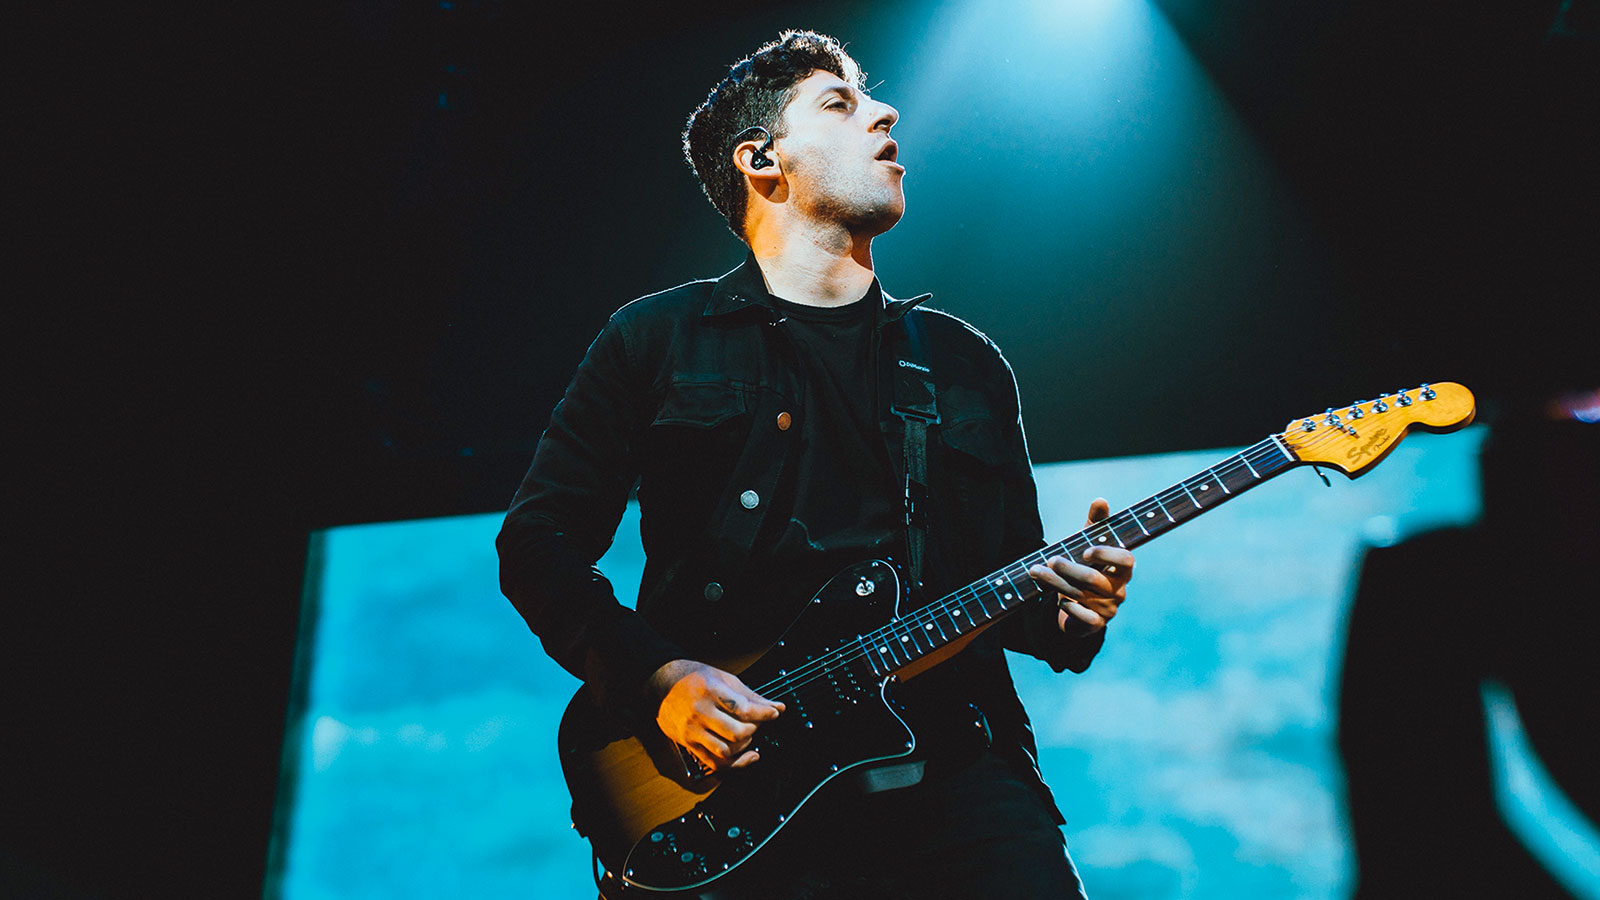 5 minutes alone Fall Out Boy's Joe Trohman “It’s better to have an identity than be the world